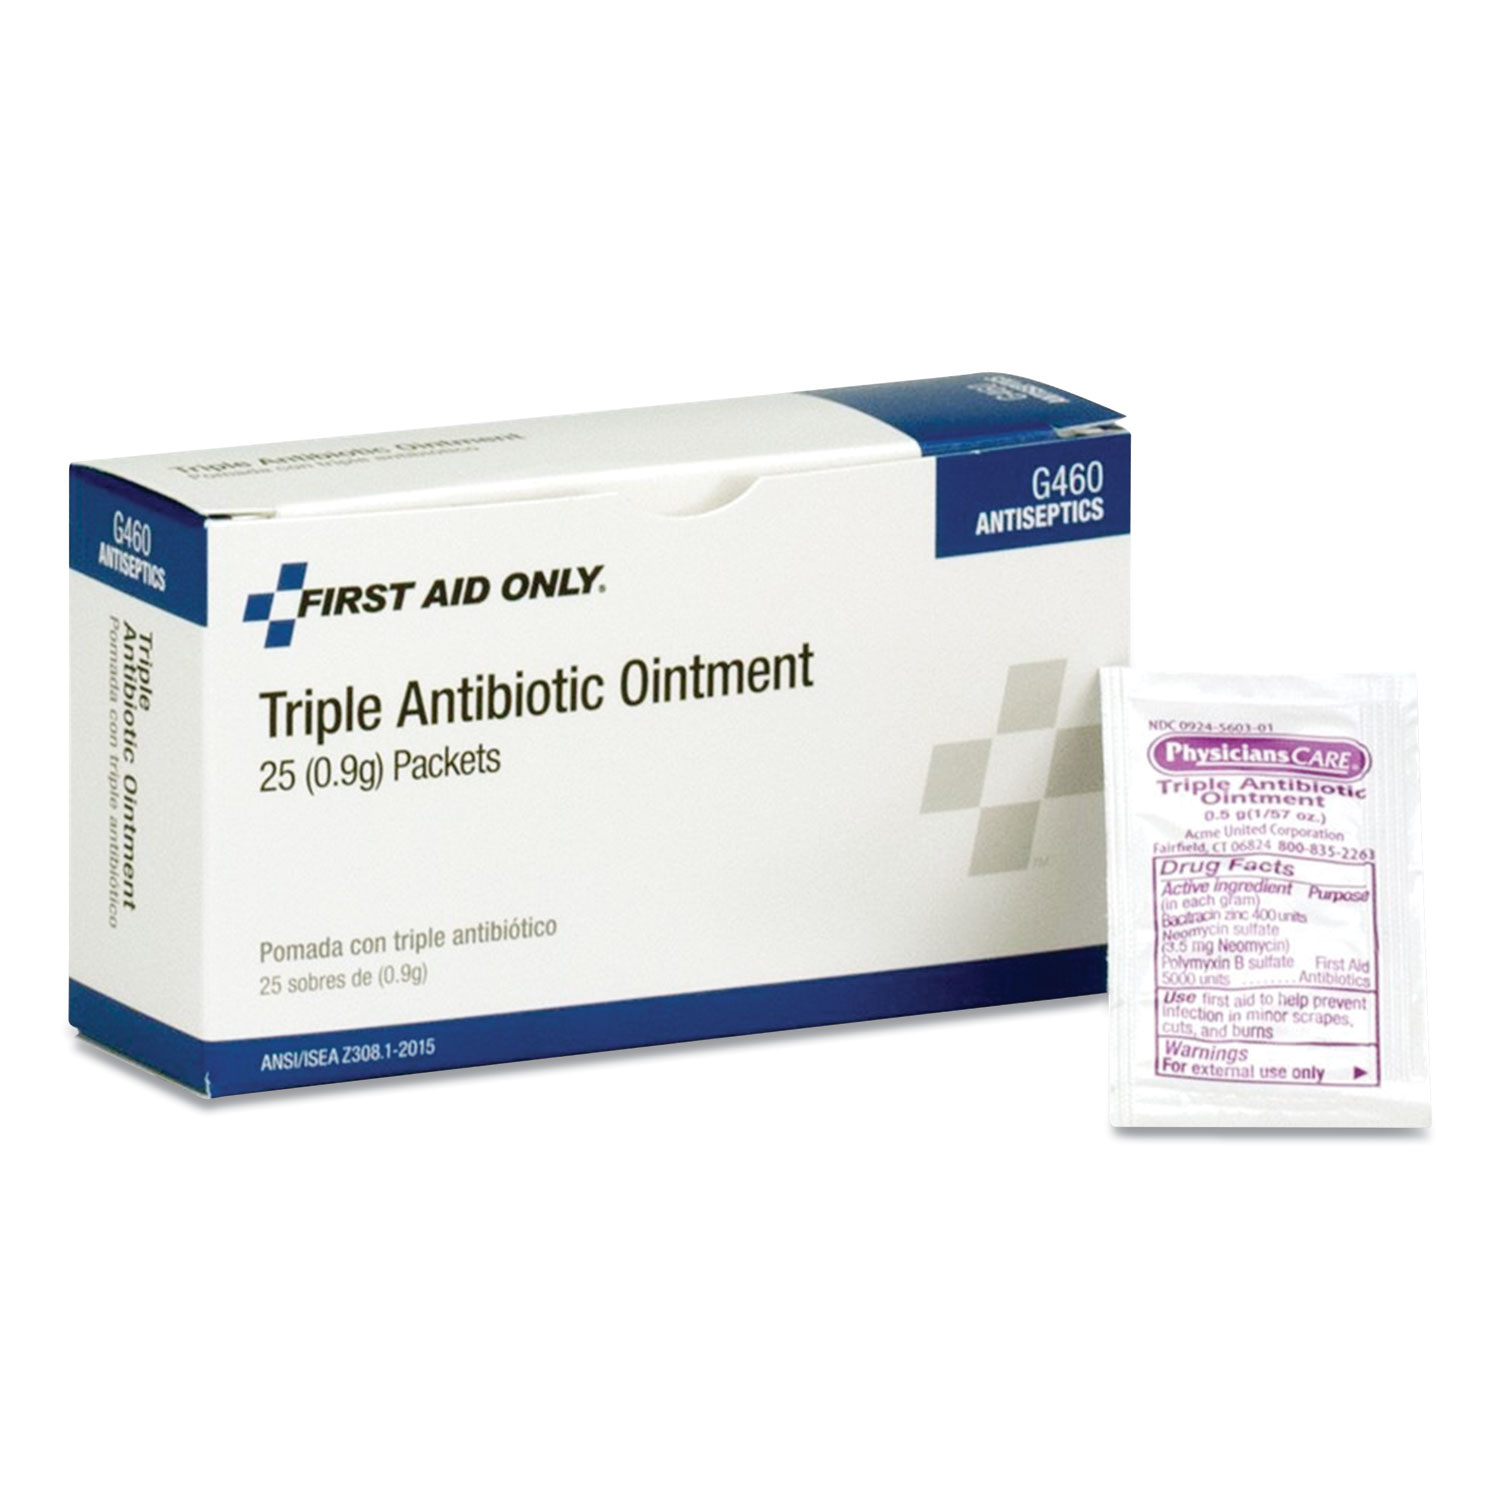 First Aid Only™ Triple Antibiotic Ointment, 0.03 oz Packets, 25/Box